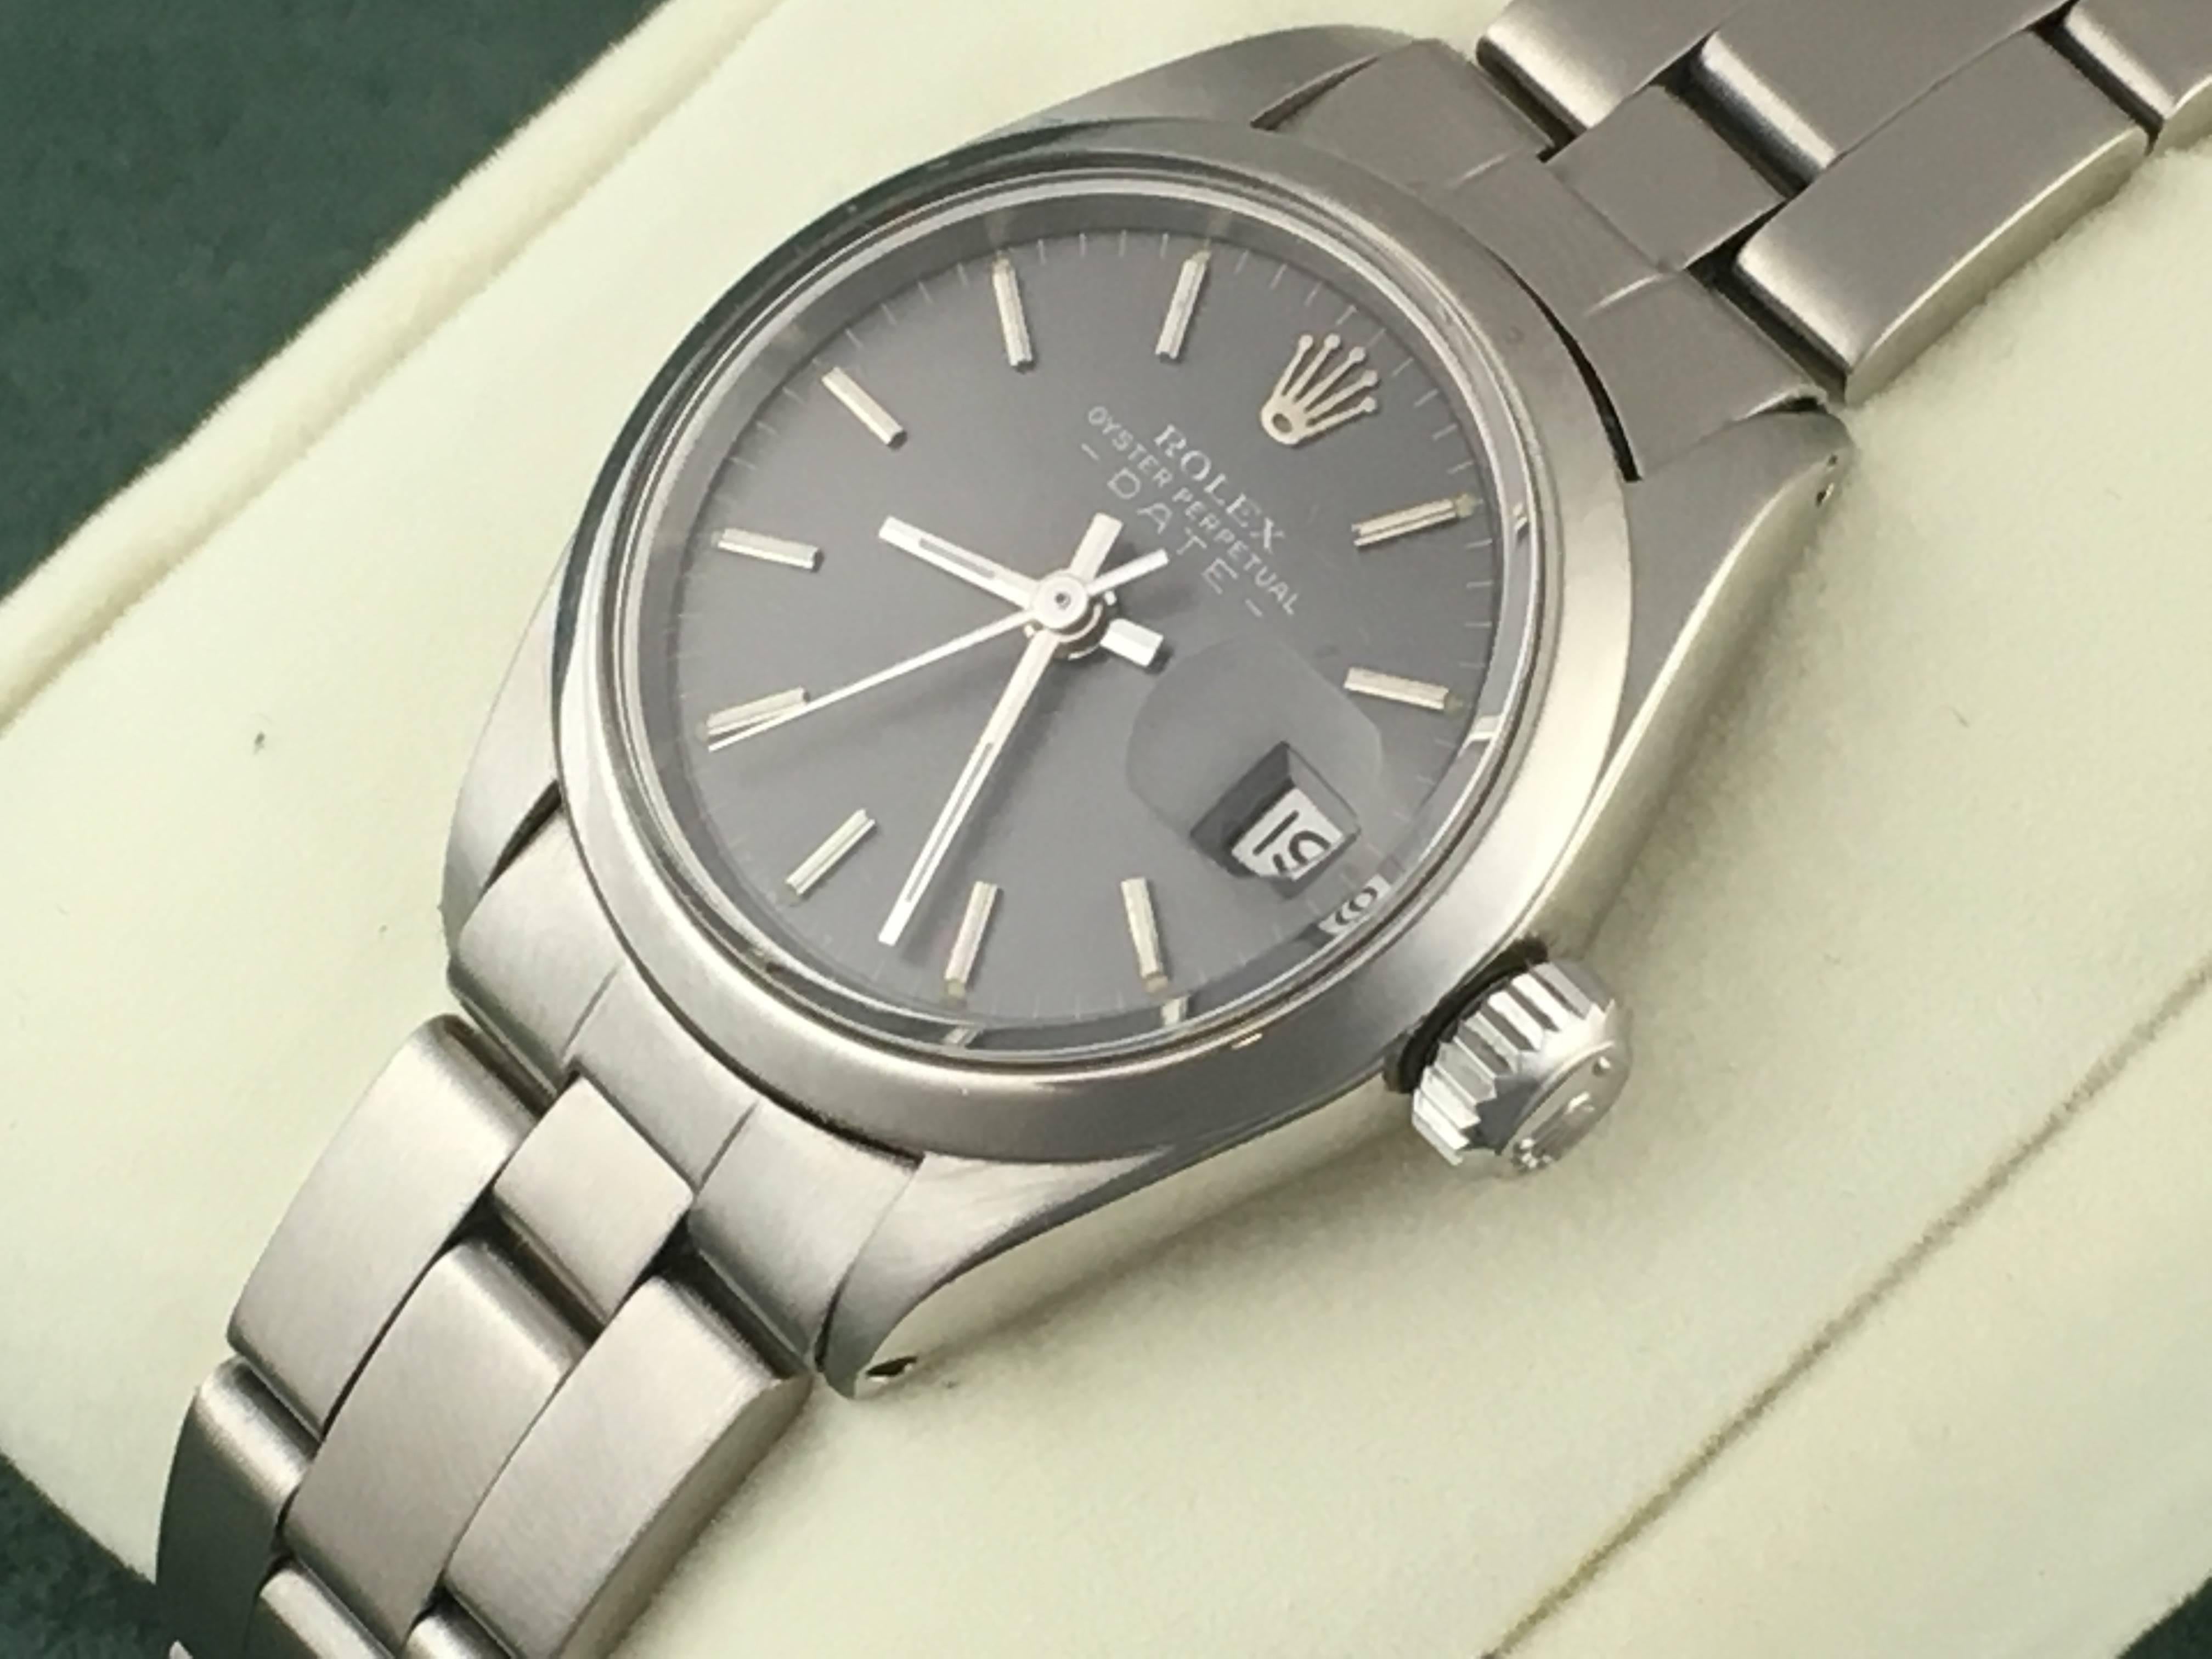 The Rolex Date Model 6917 pre-owned ladies automatic wrist watch. Rich gray dial with polished hour markers and stainless steel case with smooth bezel. Measures 25mm. Features the classic Rolex stainless steel oyster bracelet. Box, instruction